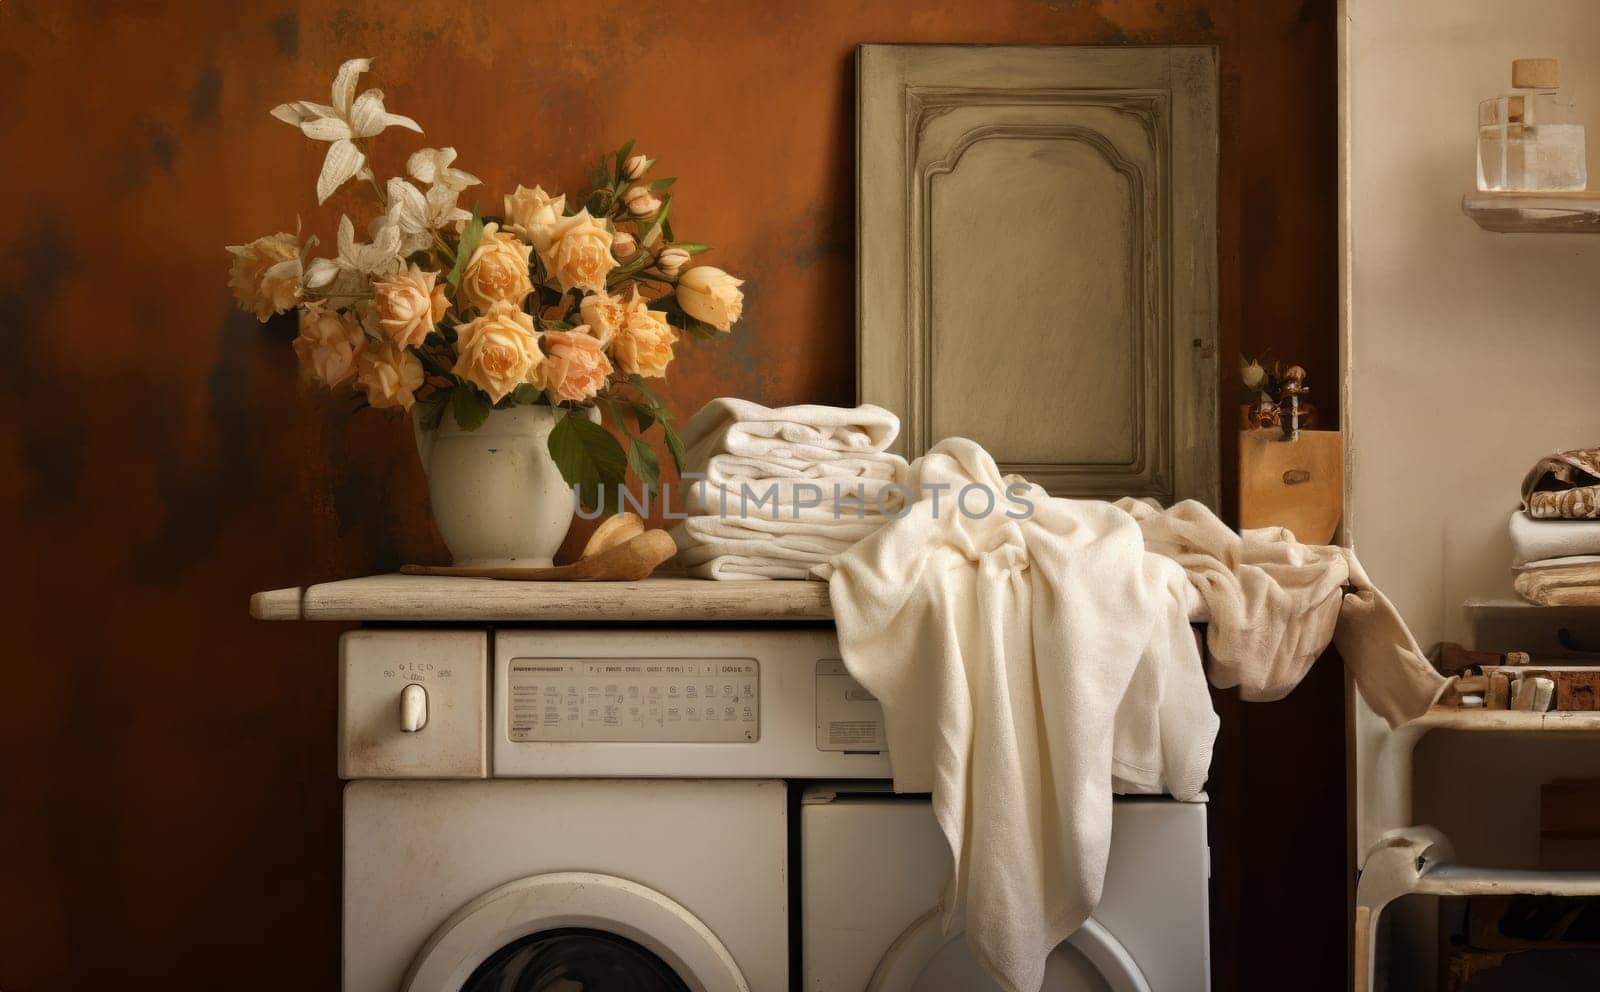 In a modern laundry setting, the washing machine stands ready amidst neatly arranged clothes, embodying efficiency and convenience as it awaits the commencement of a cycle, capturing the essence of contemporary fabric care in a domestic space by dotshock